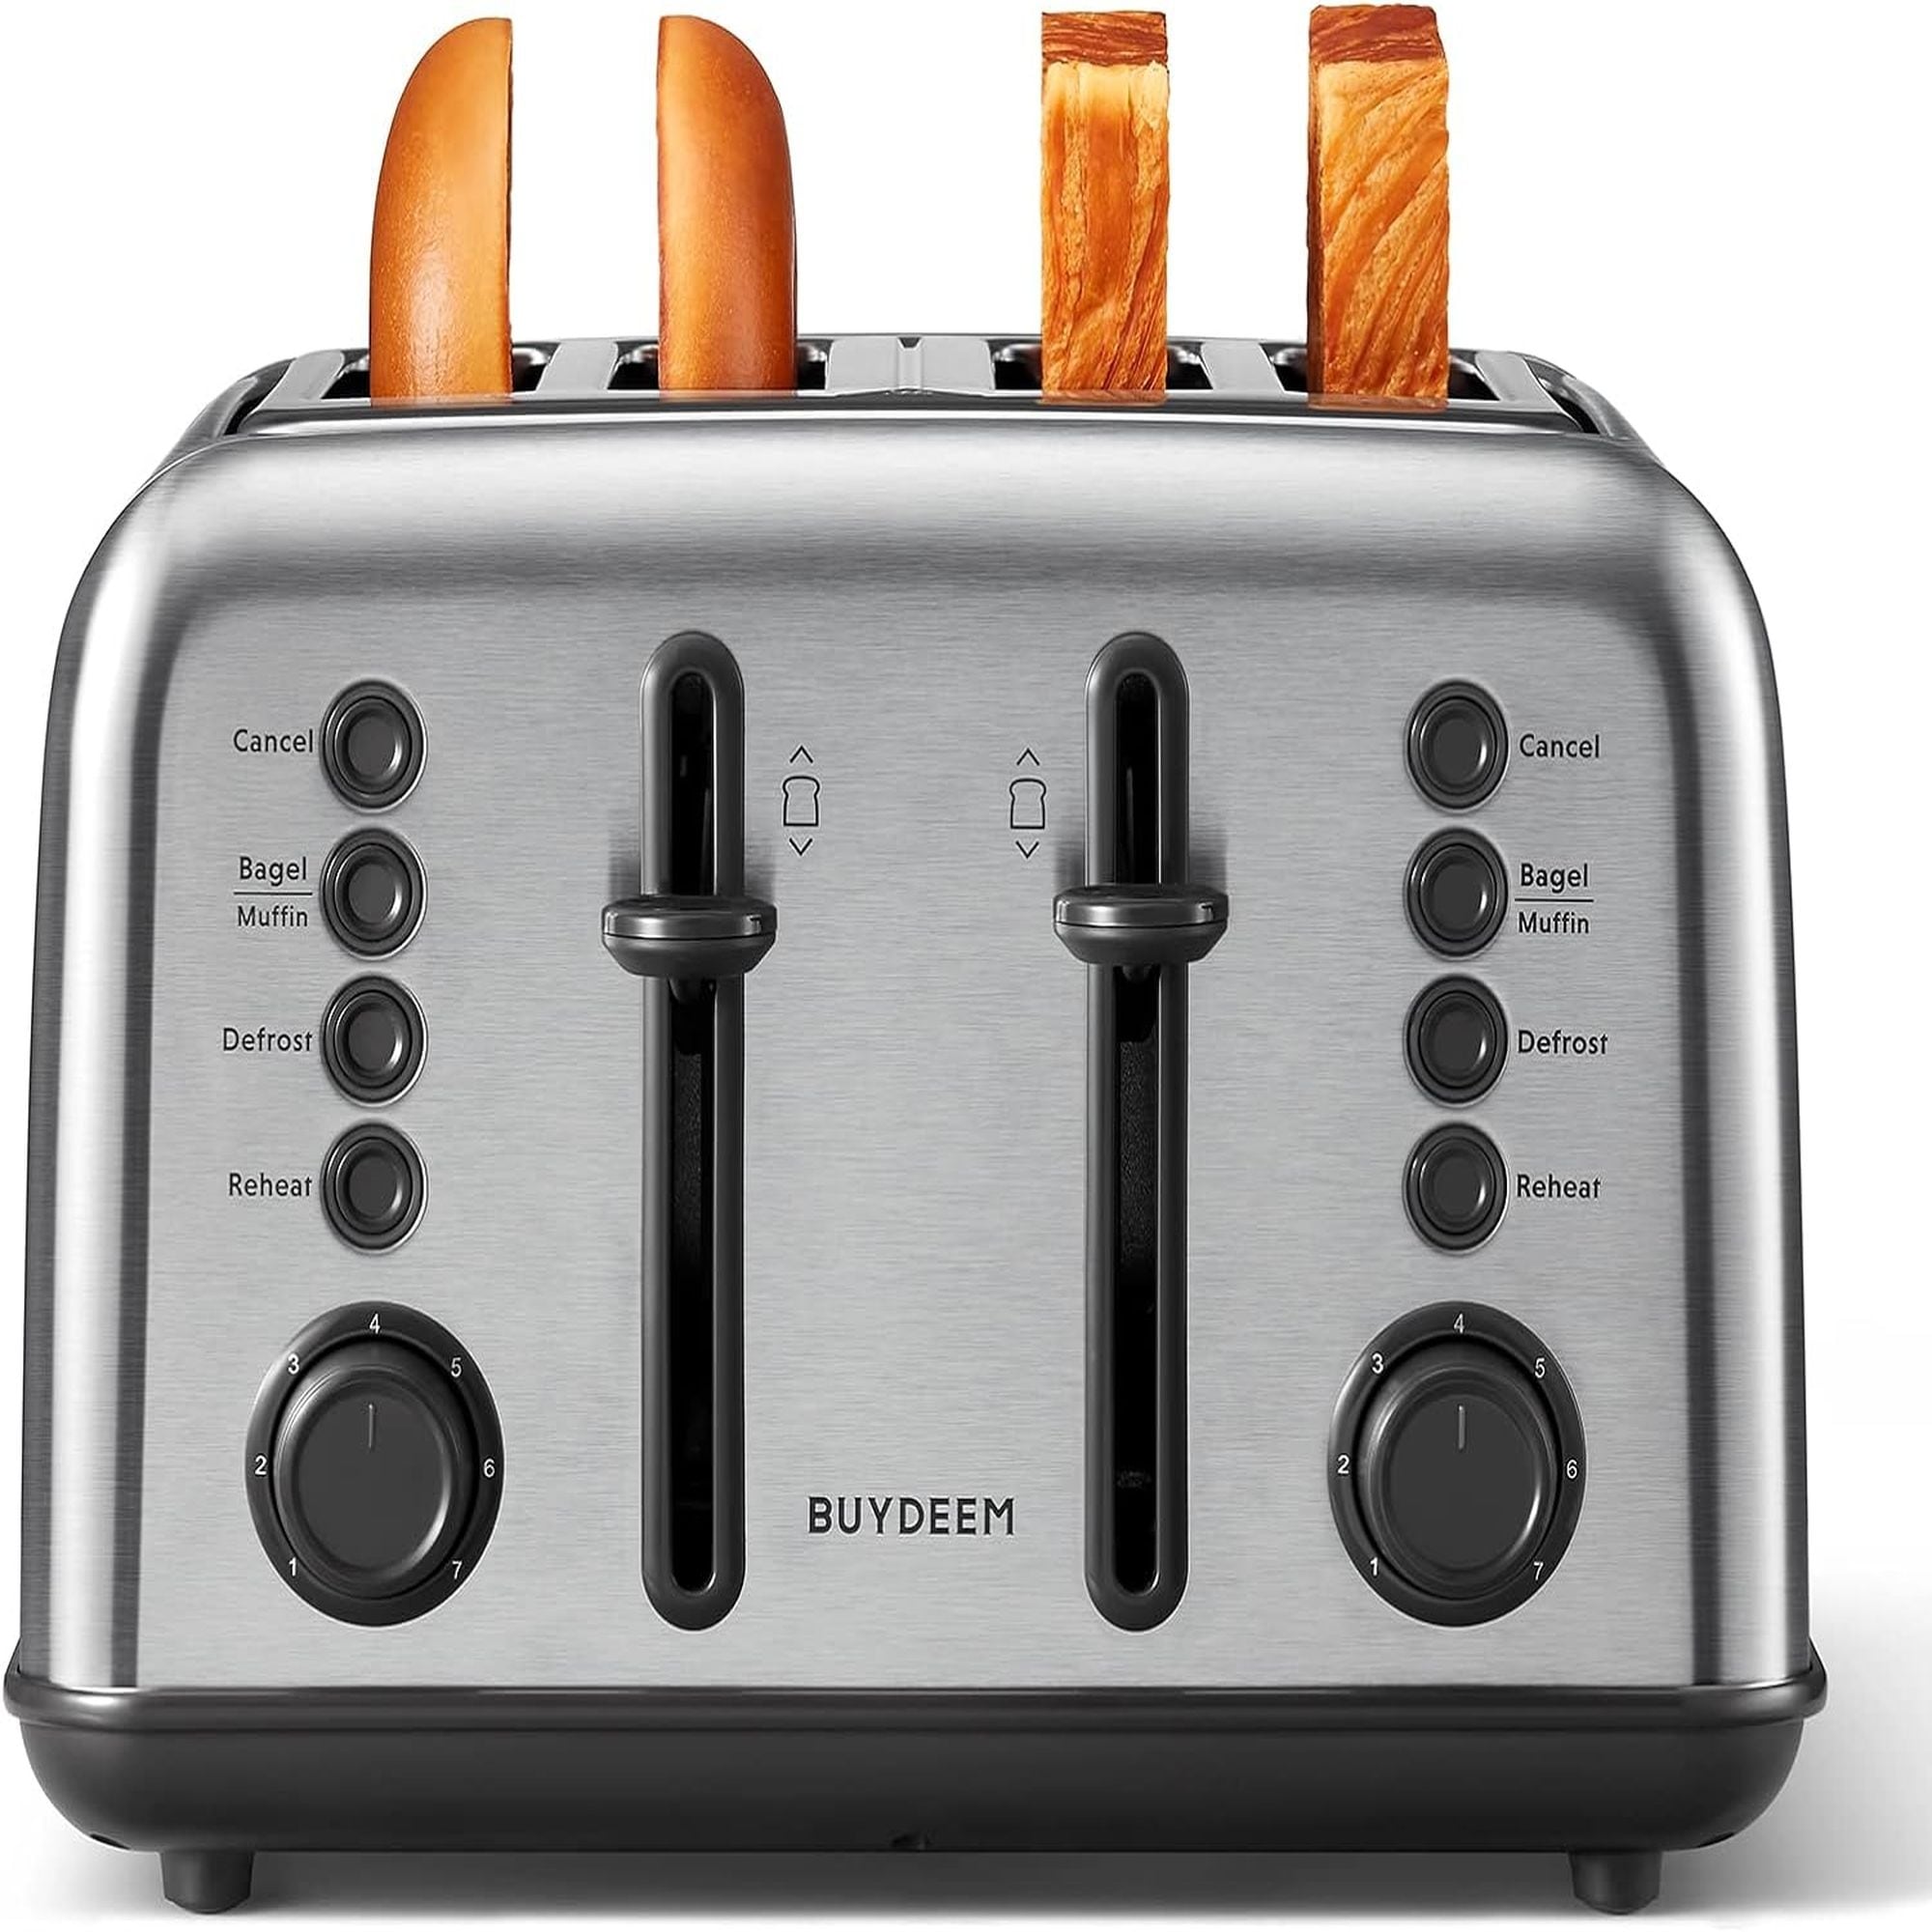 https://ak1.ostkcdn.com/images/products/is/images/direct/3f2e66166577792369fa5a9258882a9f0b5d76b9/BUYDEEM-DT640-4-Slice-Toaster%2C-Bagel-and-Muffin-Function%2C-Removal-Crumb-Tray%2C-7-Shade-Settings-%28Stainless-Steel%29.jpg